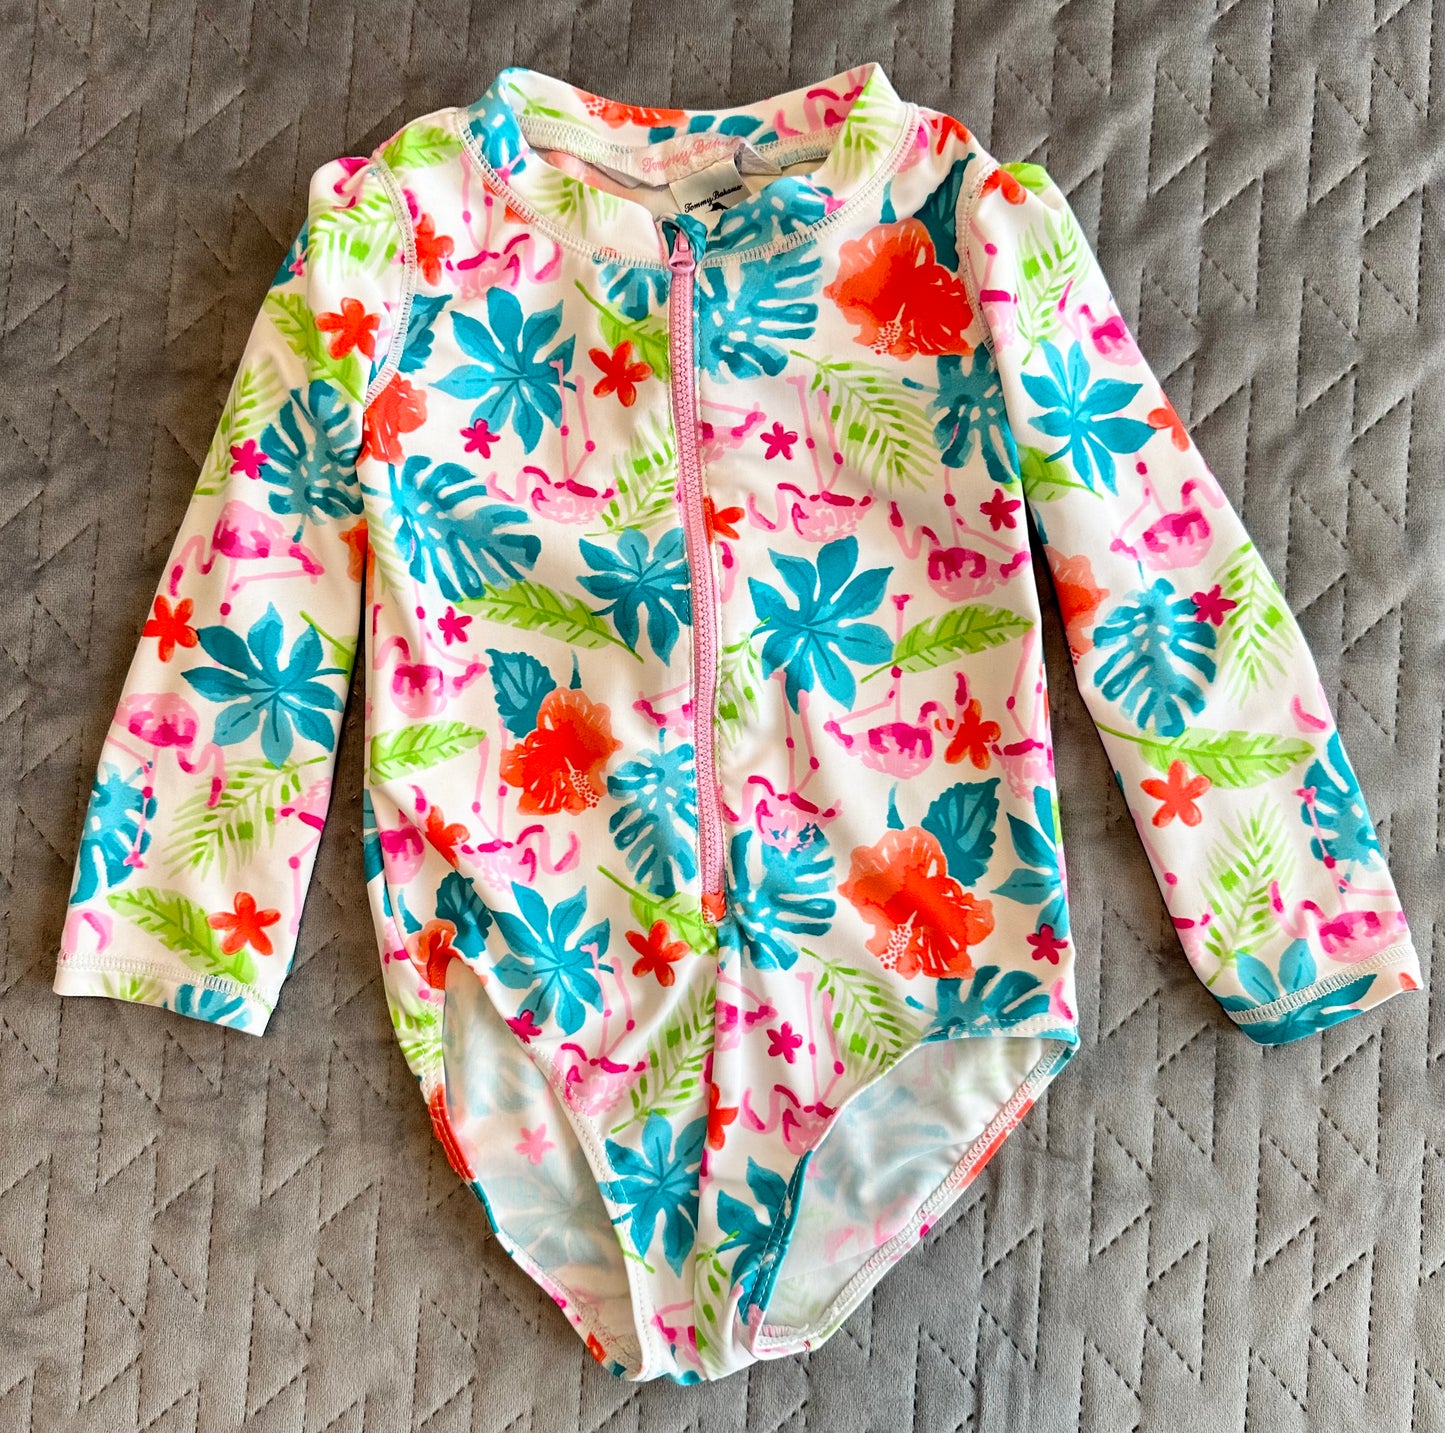 Tommy Bahama girls bathing suit size 24 months